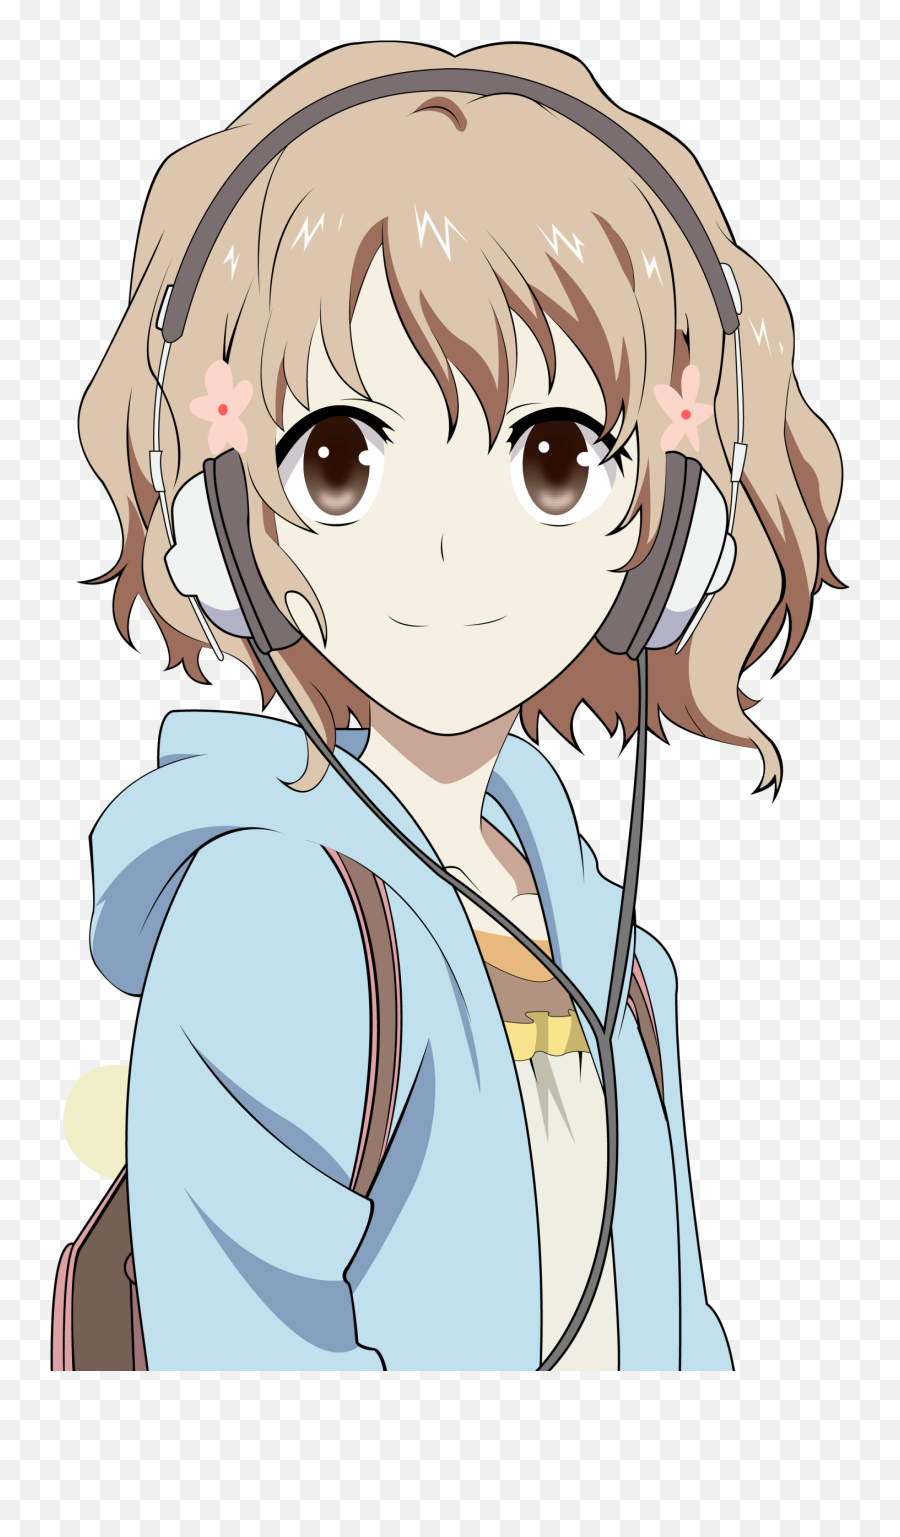 Download Png - Anime Girl With Short Blonde Hair Anime Girls With Short Blonde Hair,Brown Eyes Png